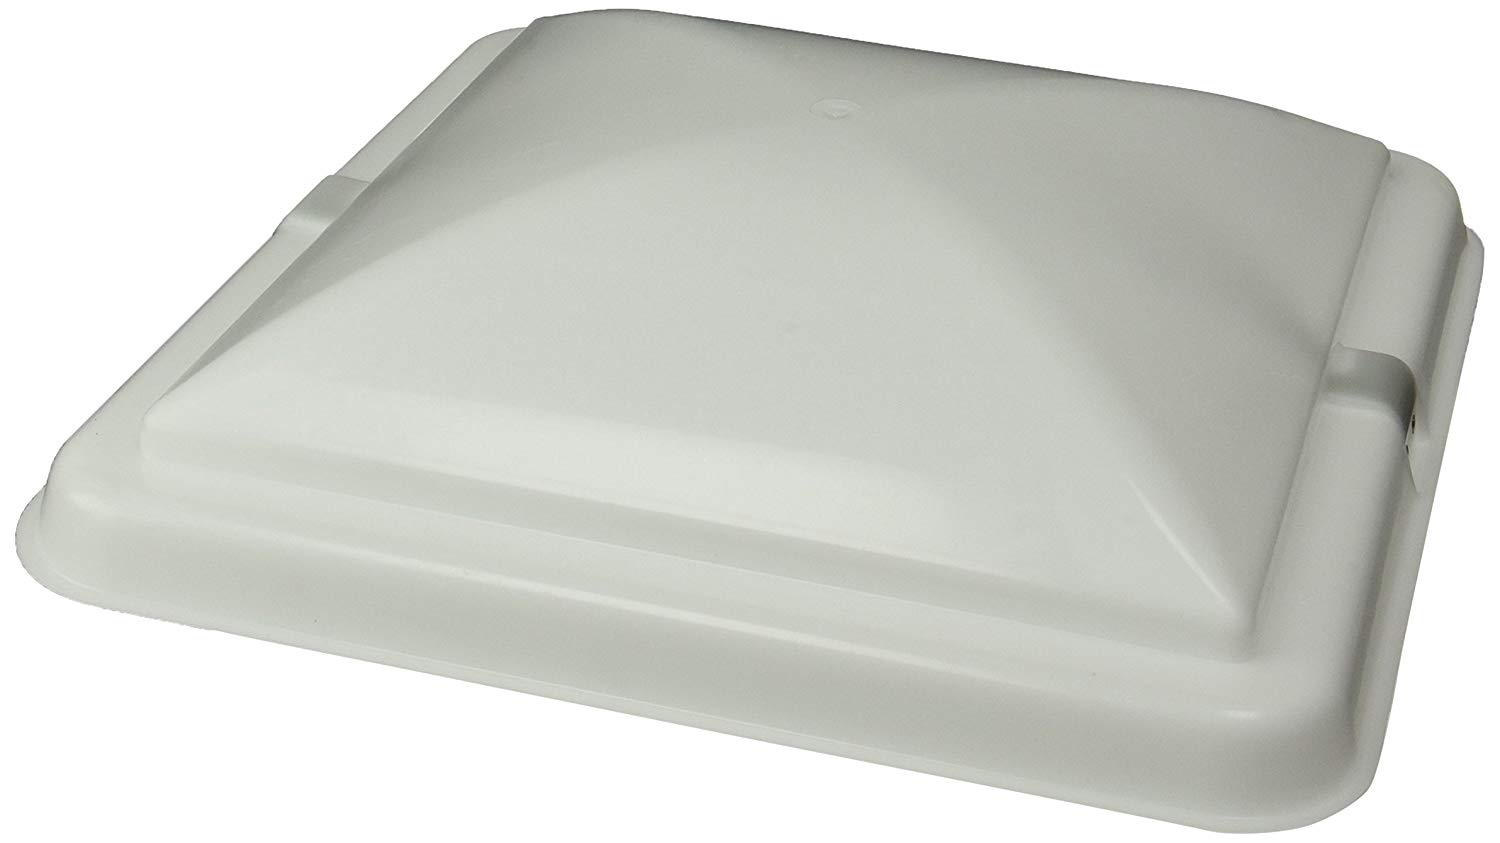 Ventline By Dexter BVO554-01 White Rounded Shaped RV Roof Vent Cover